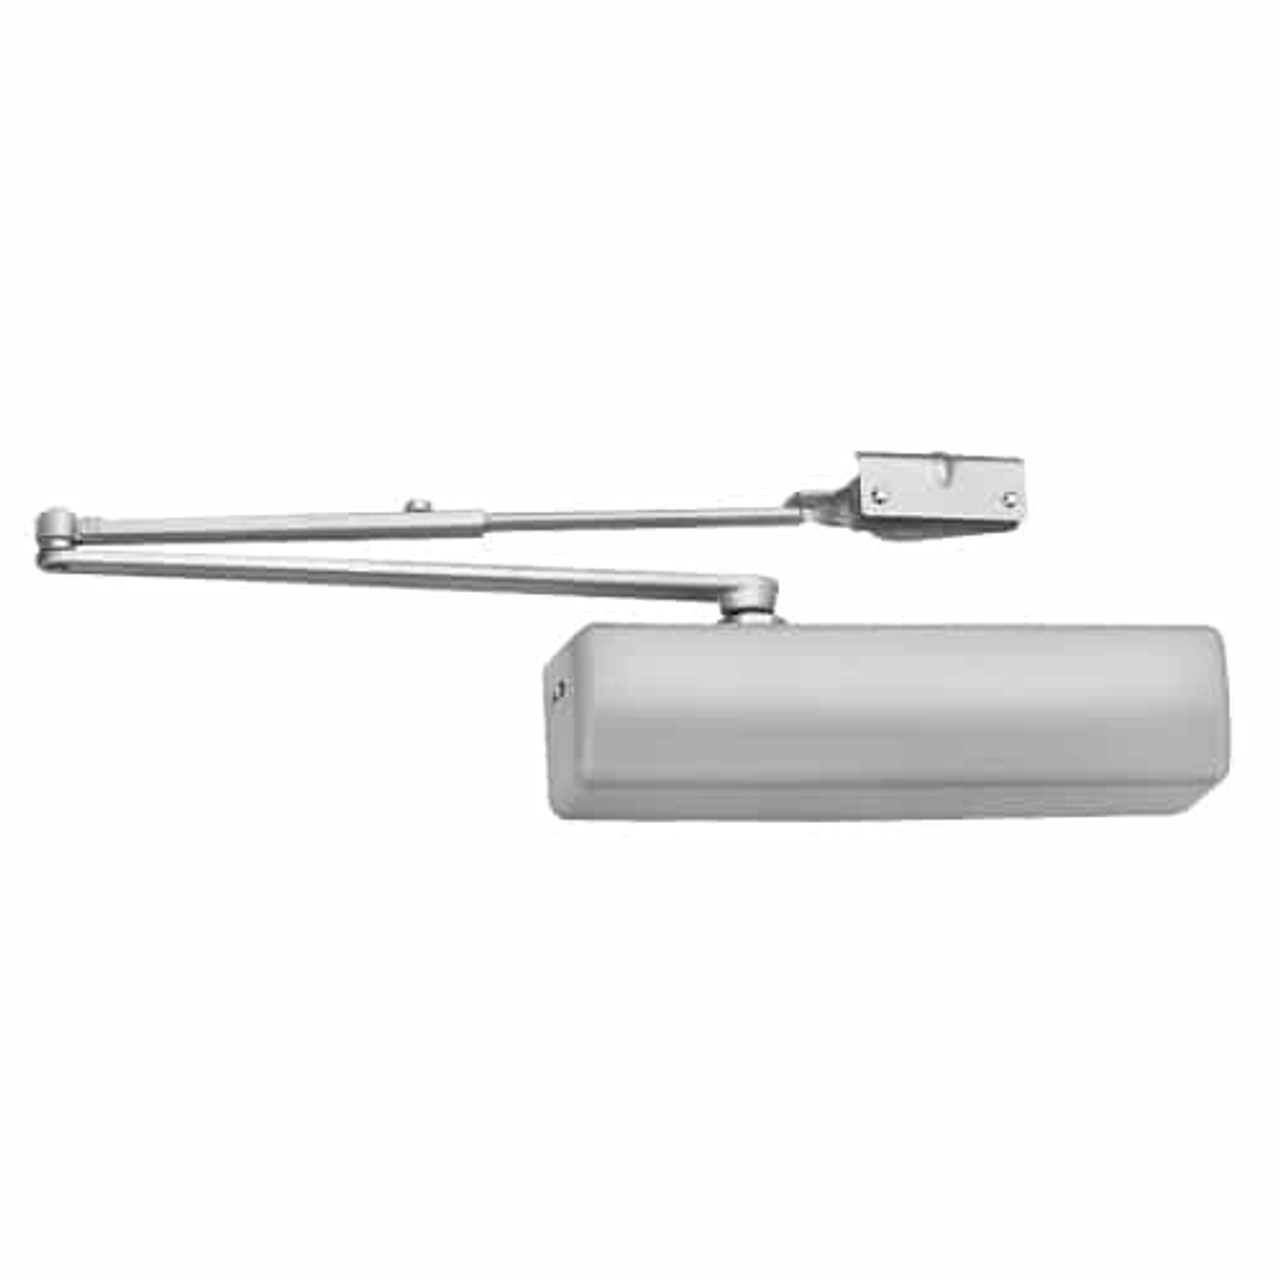 DC6413-A1-689-M54 Corbin 6000 Series Half-Sized Parallel Arm Door Closers in Silver Aluminum Finish